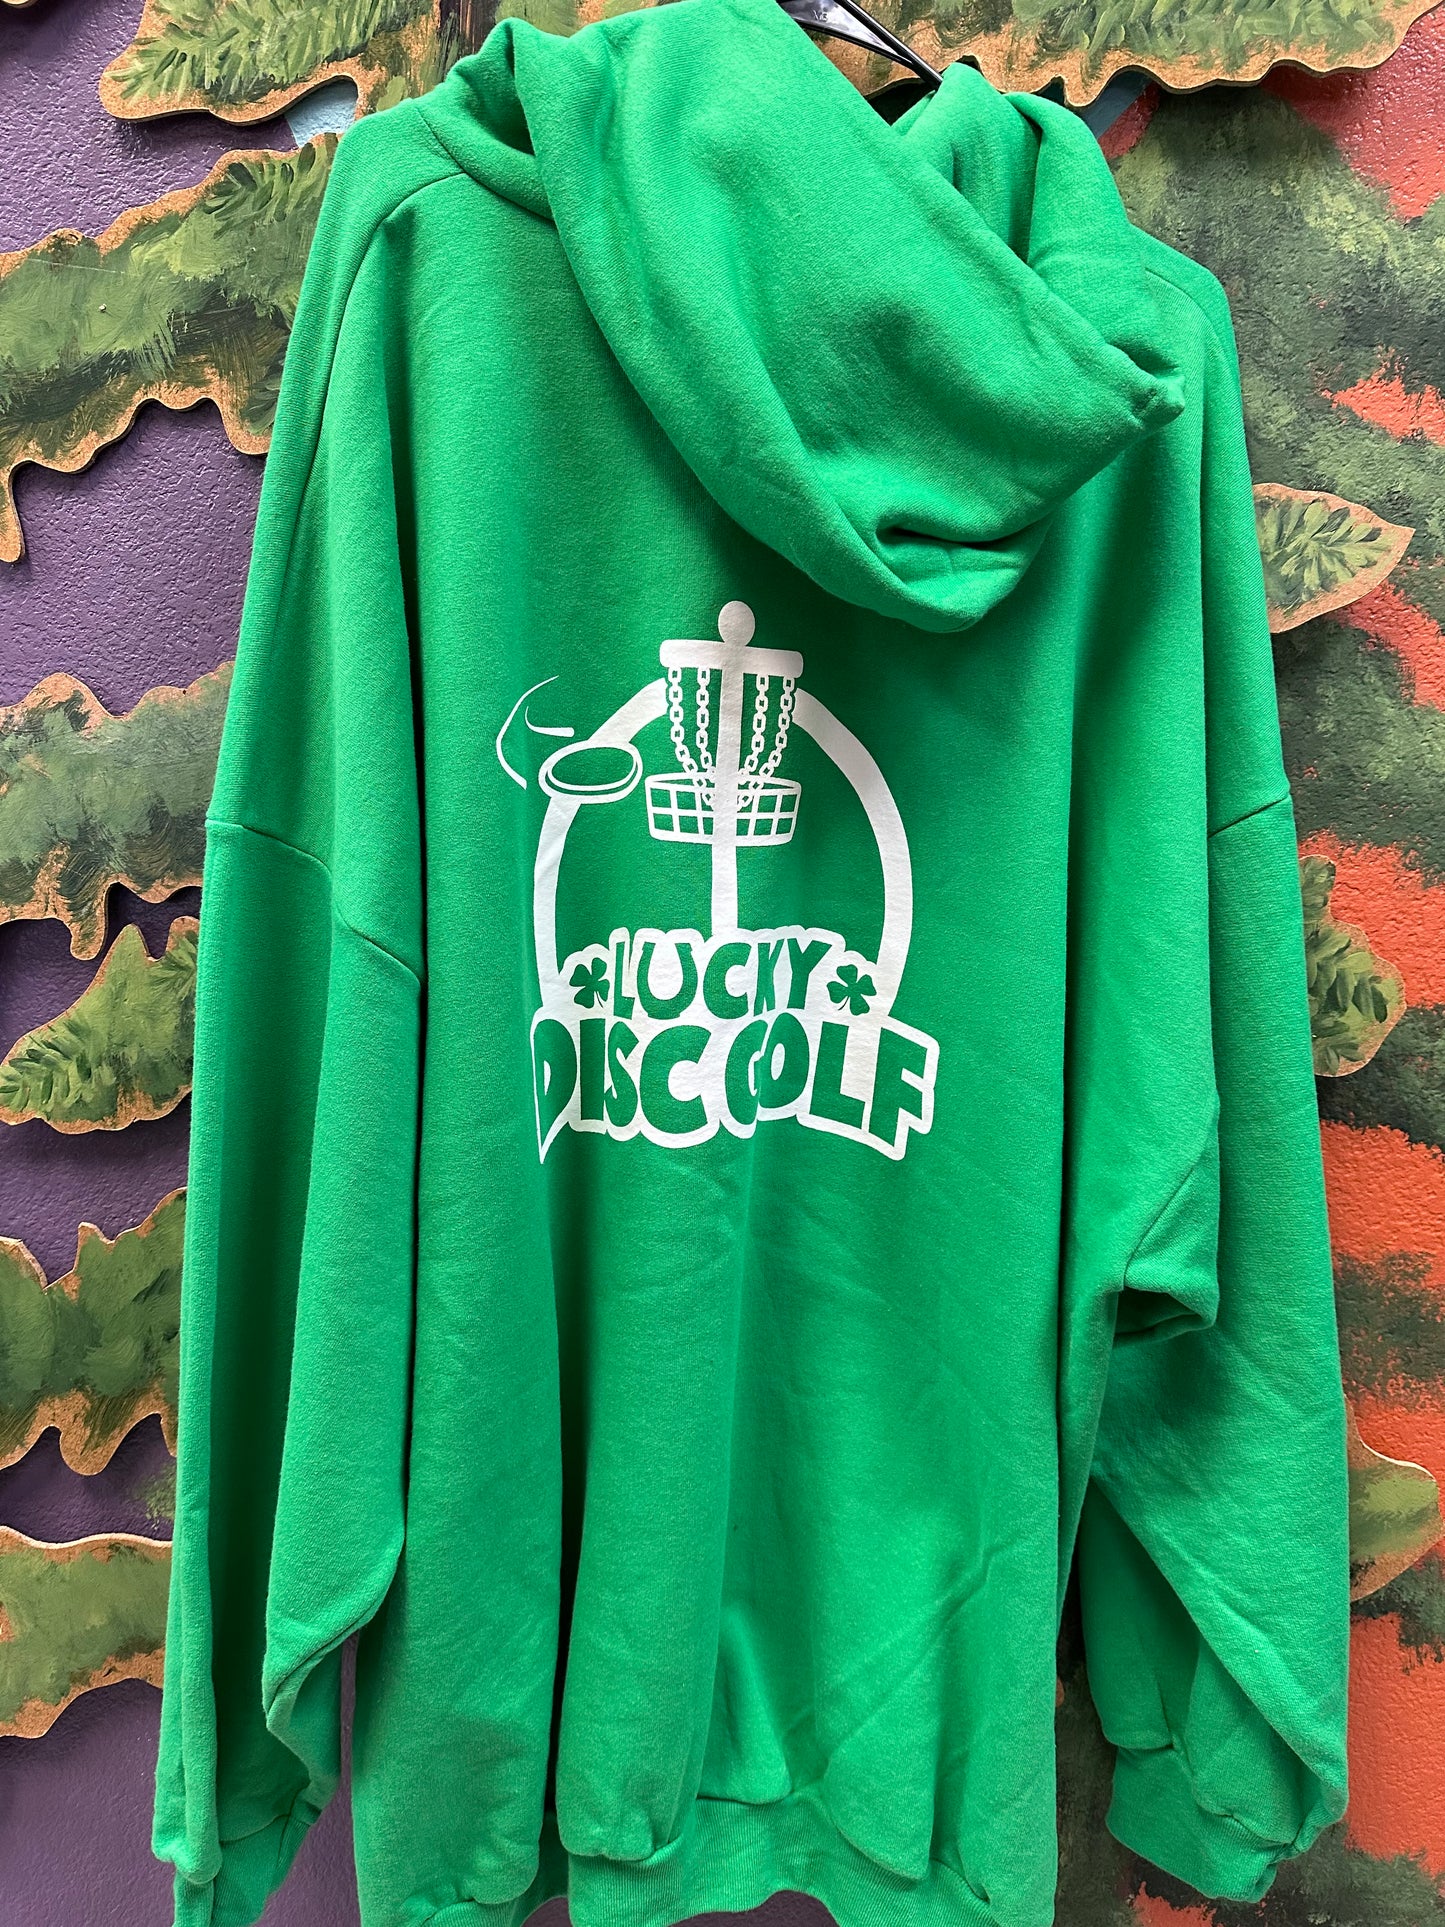 Lucky Hoodies - available in 7 colors